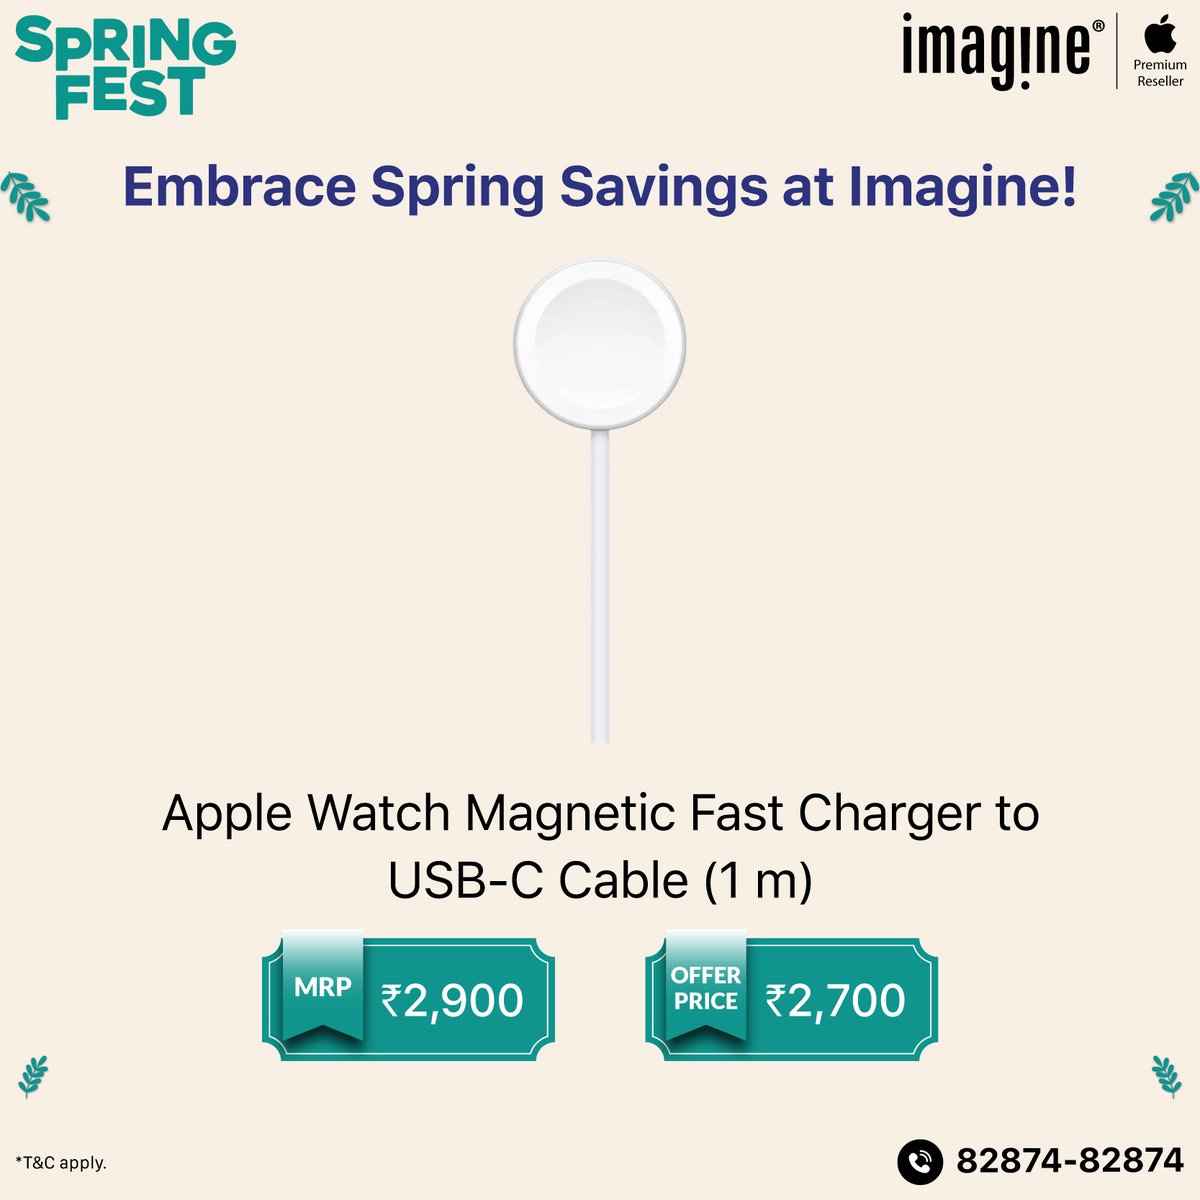 Embrace Spring Savings at Imagine! 🍃 Switch to latest Apple Watch now at Imagine! ✅ Upto ₹4,000* Instant Cashback on ICICI Bank Debit and Credit cards and SBI Credit cards. ✅ Upto ₹2,000* Instant In-store discount ✅ Get upto ₹2,000* Exchange bonus ✅ Get speaker worth